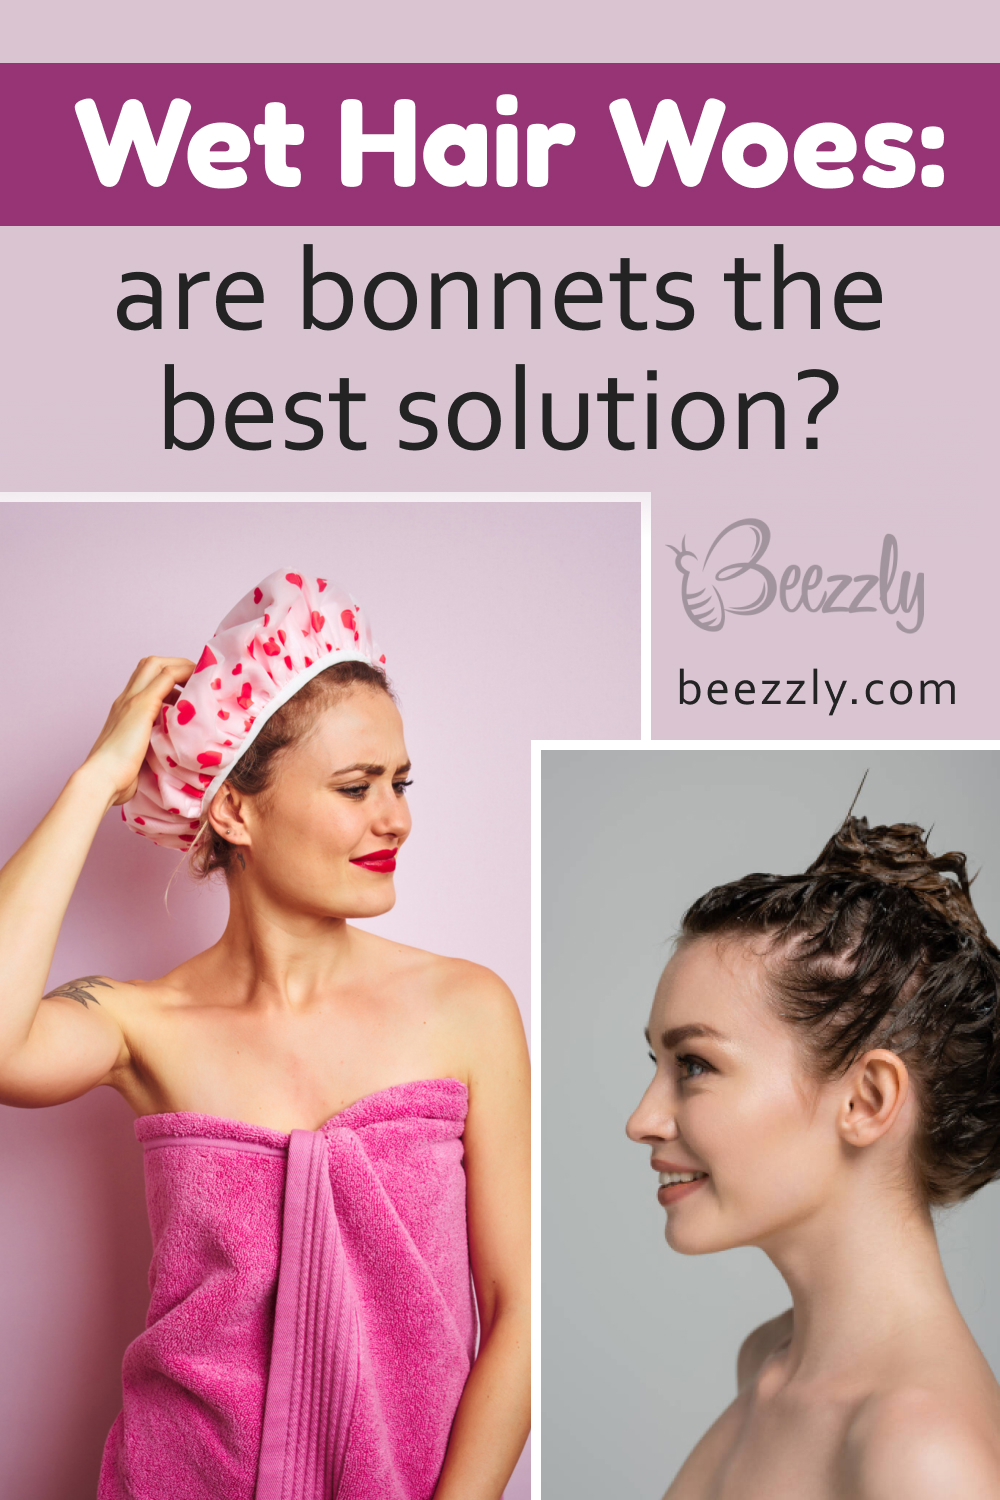 Wet Hair Woes Are Bonnets the Best Solution